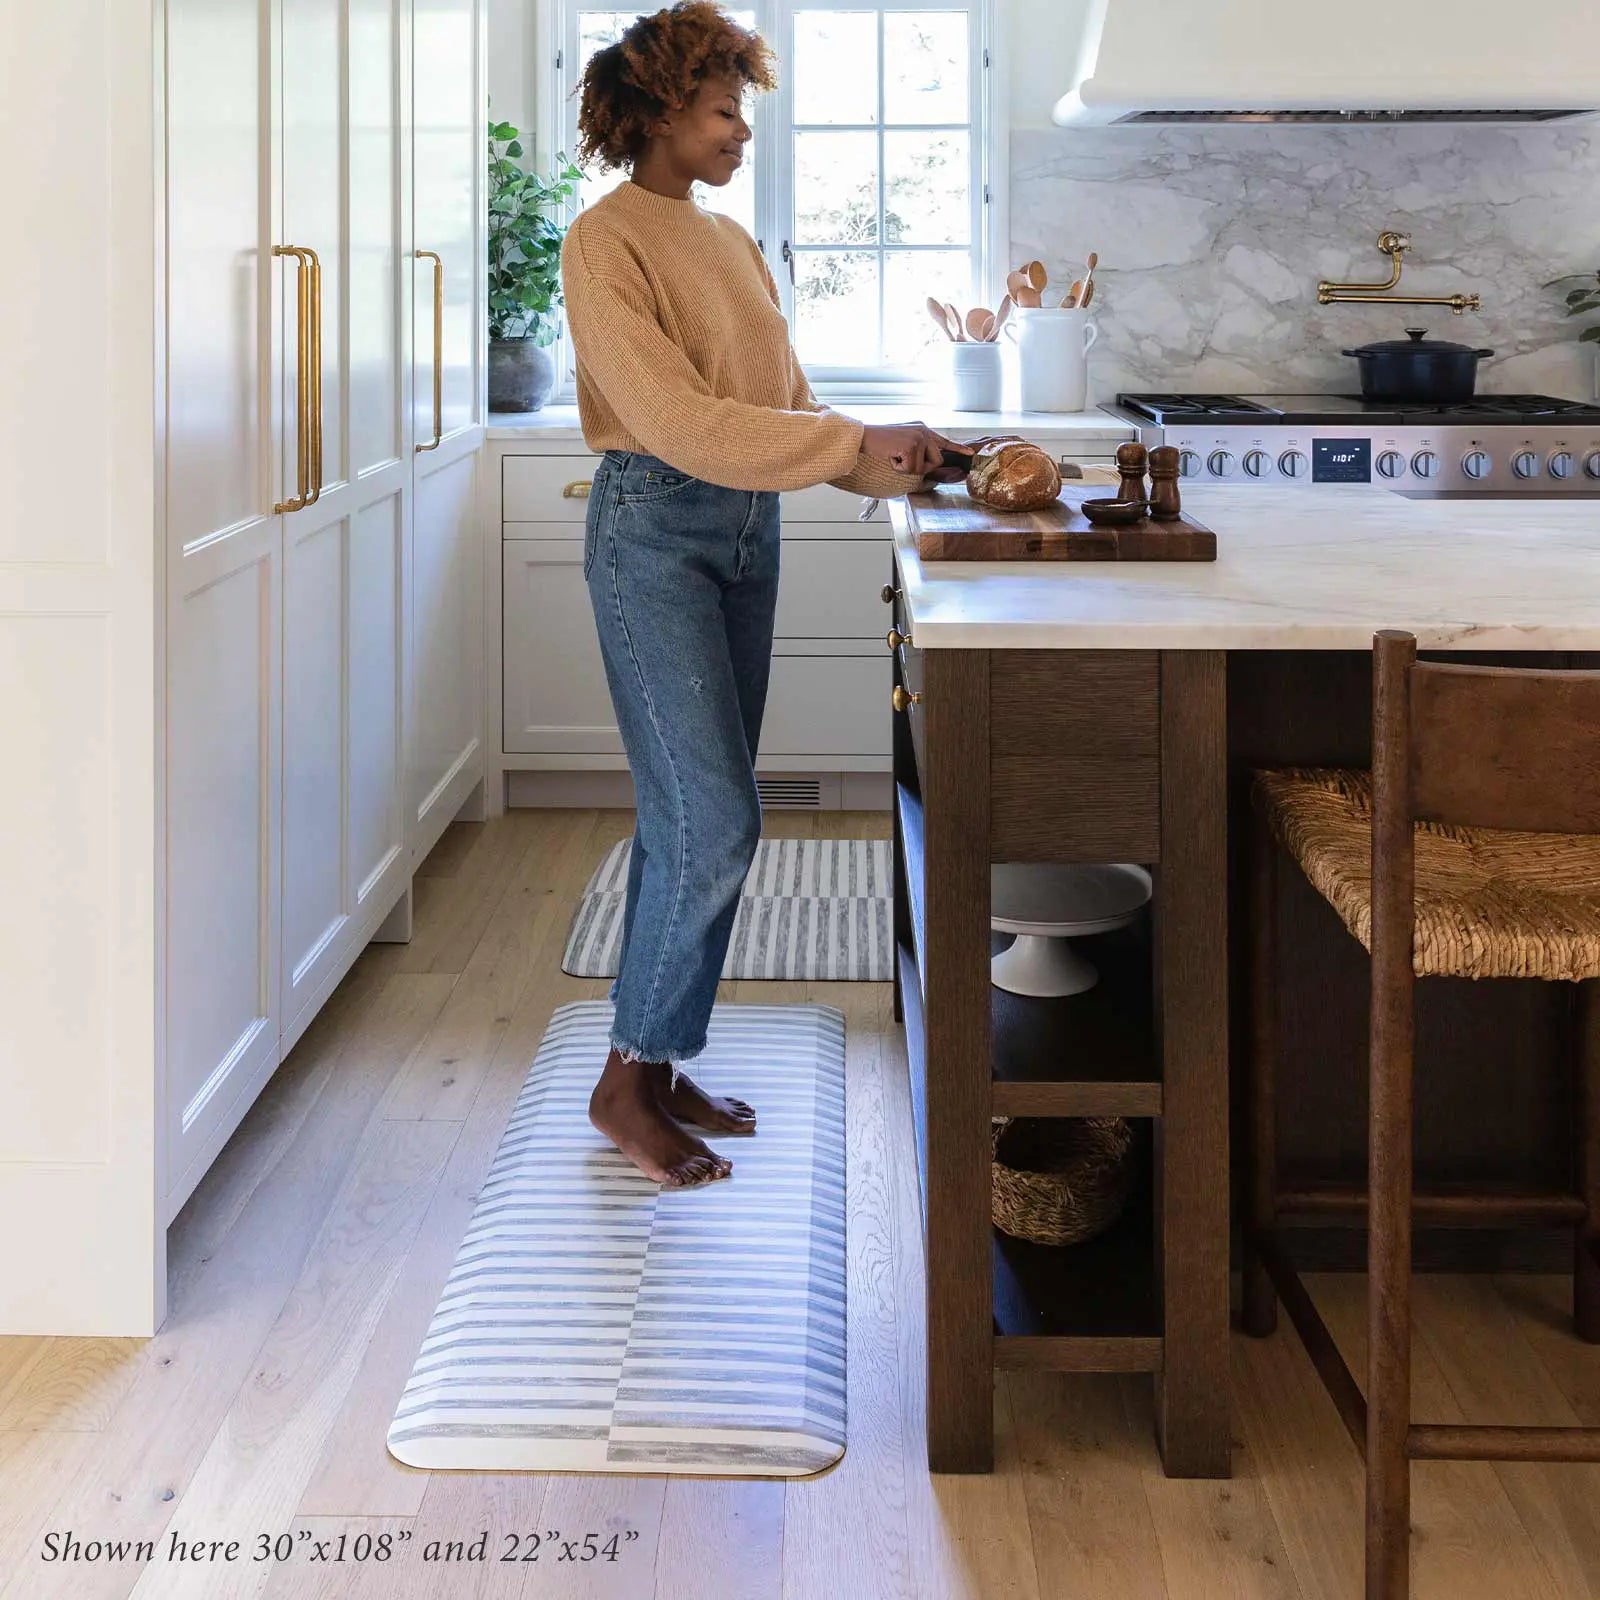 Reese pewter gray and white inverted stripe standing mat shown in kitchen in sizes 22x54 and 30x108 with woman cutting bread